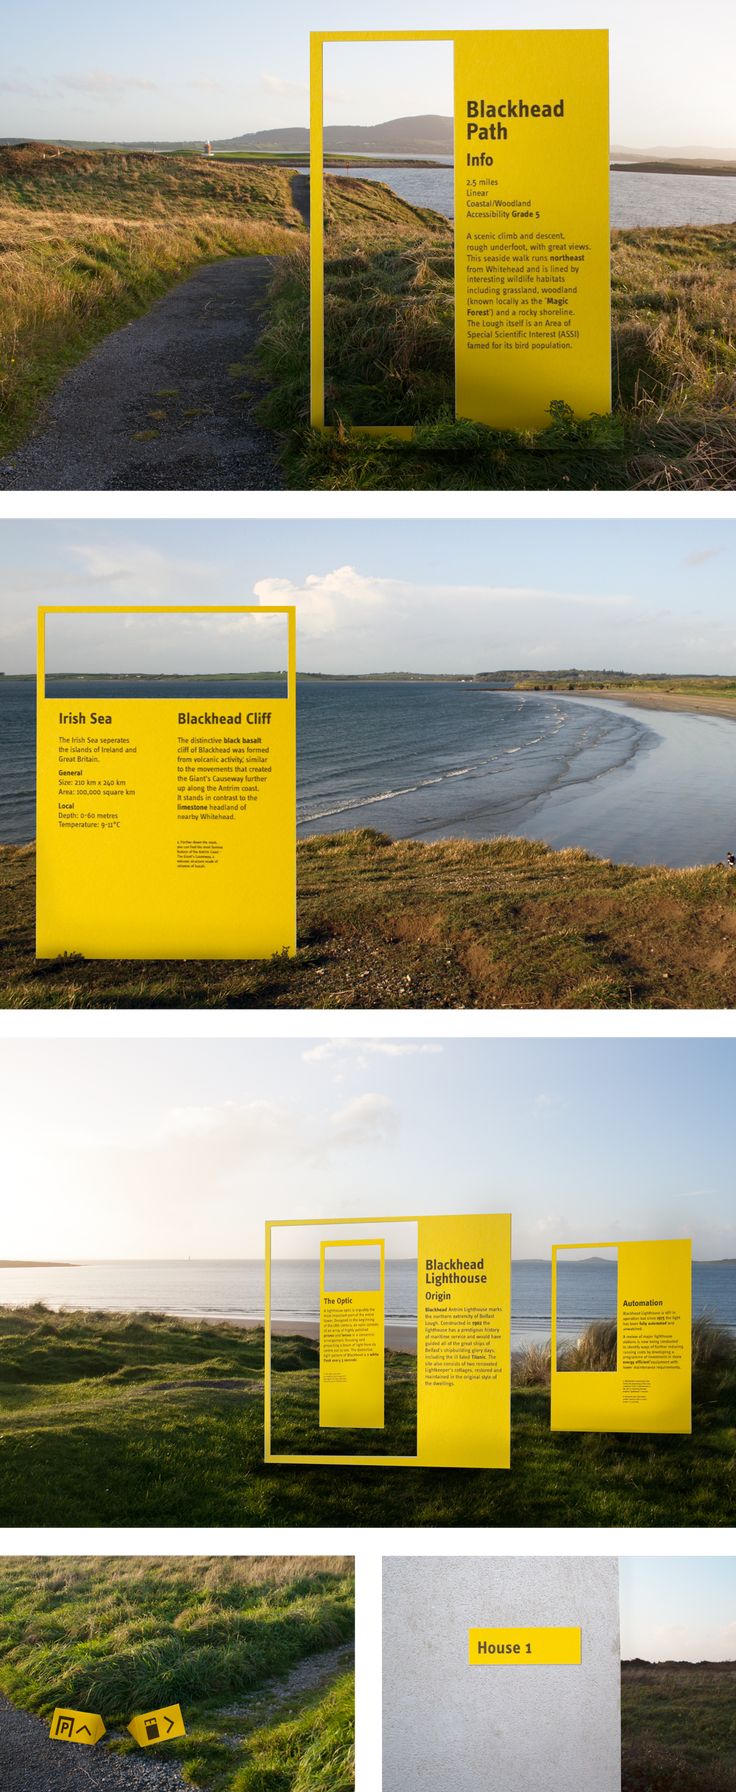 four different views of yellow signage on the side of a road next to an ocean